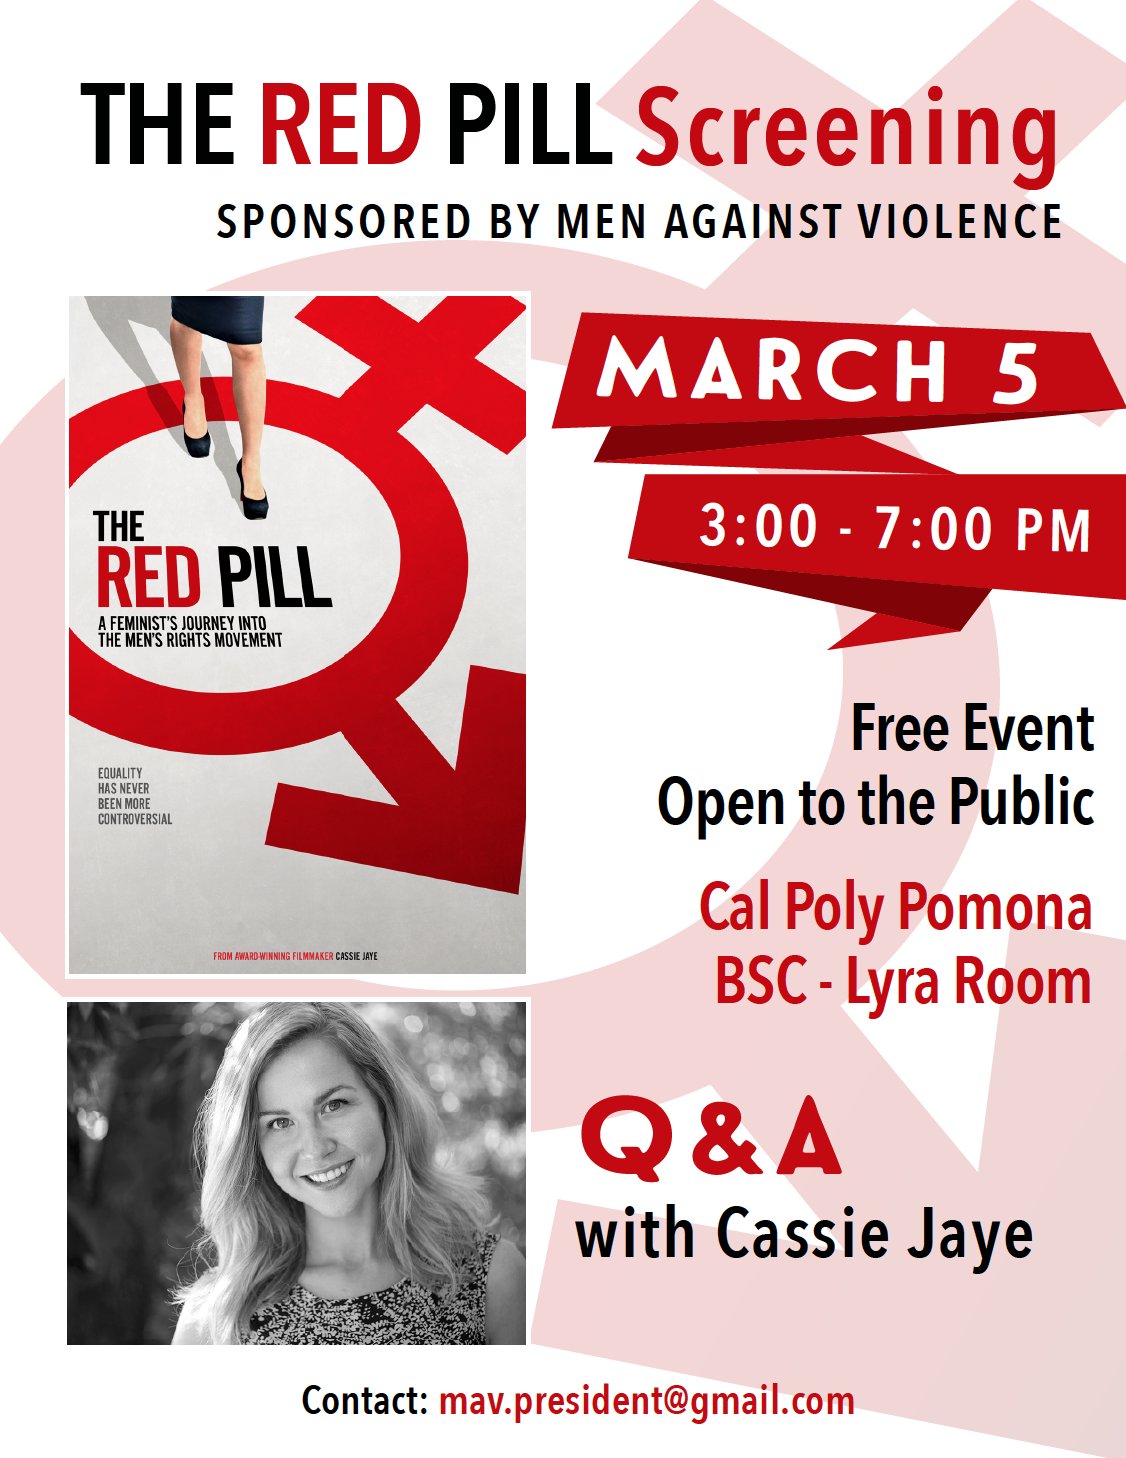 Cassie on Twitter: "If you're in Southern California, please consider attending The Red Pill screening at Cal Poly Pomona on March 5th @ be there in for a